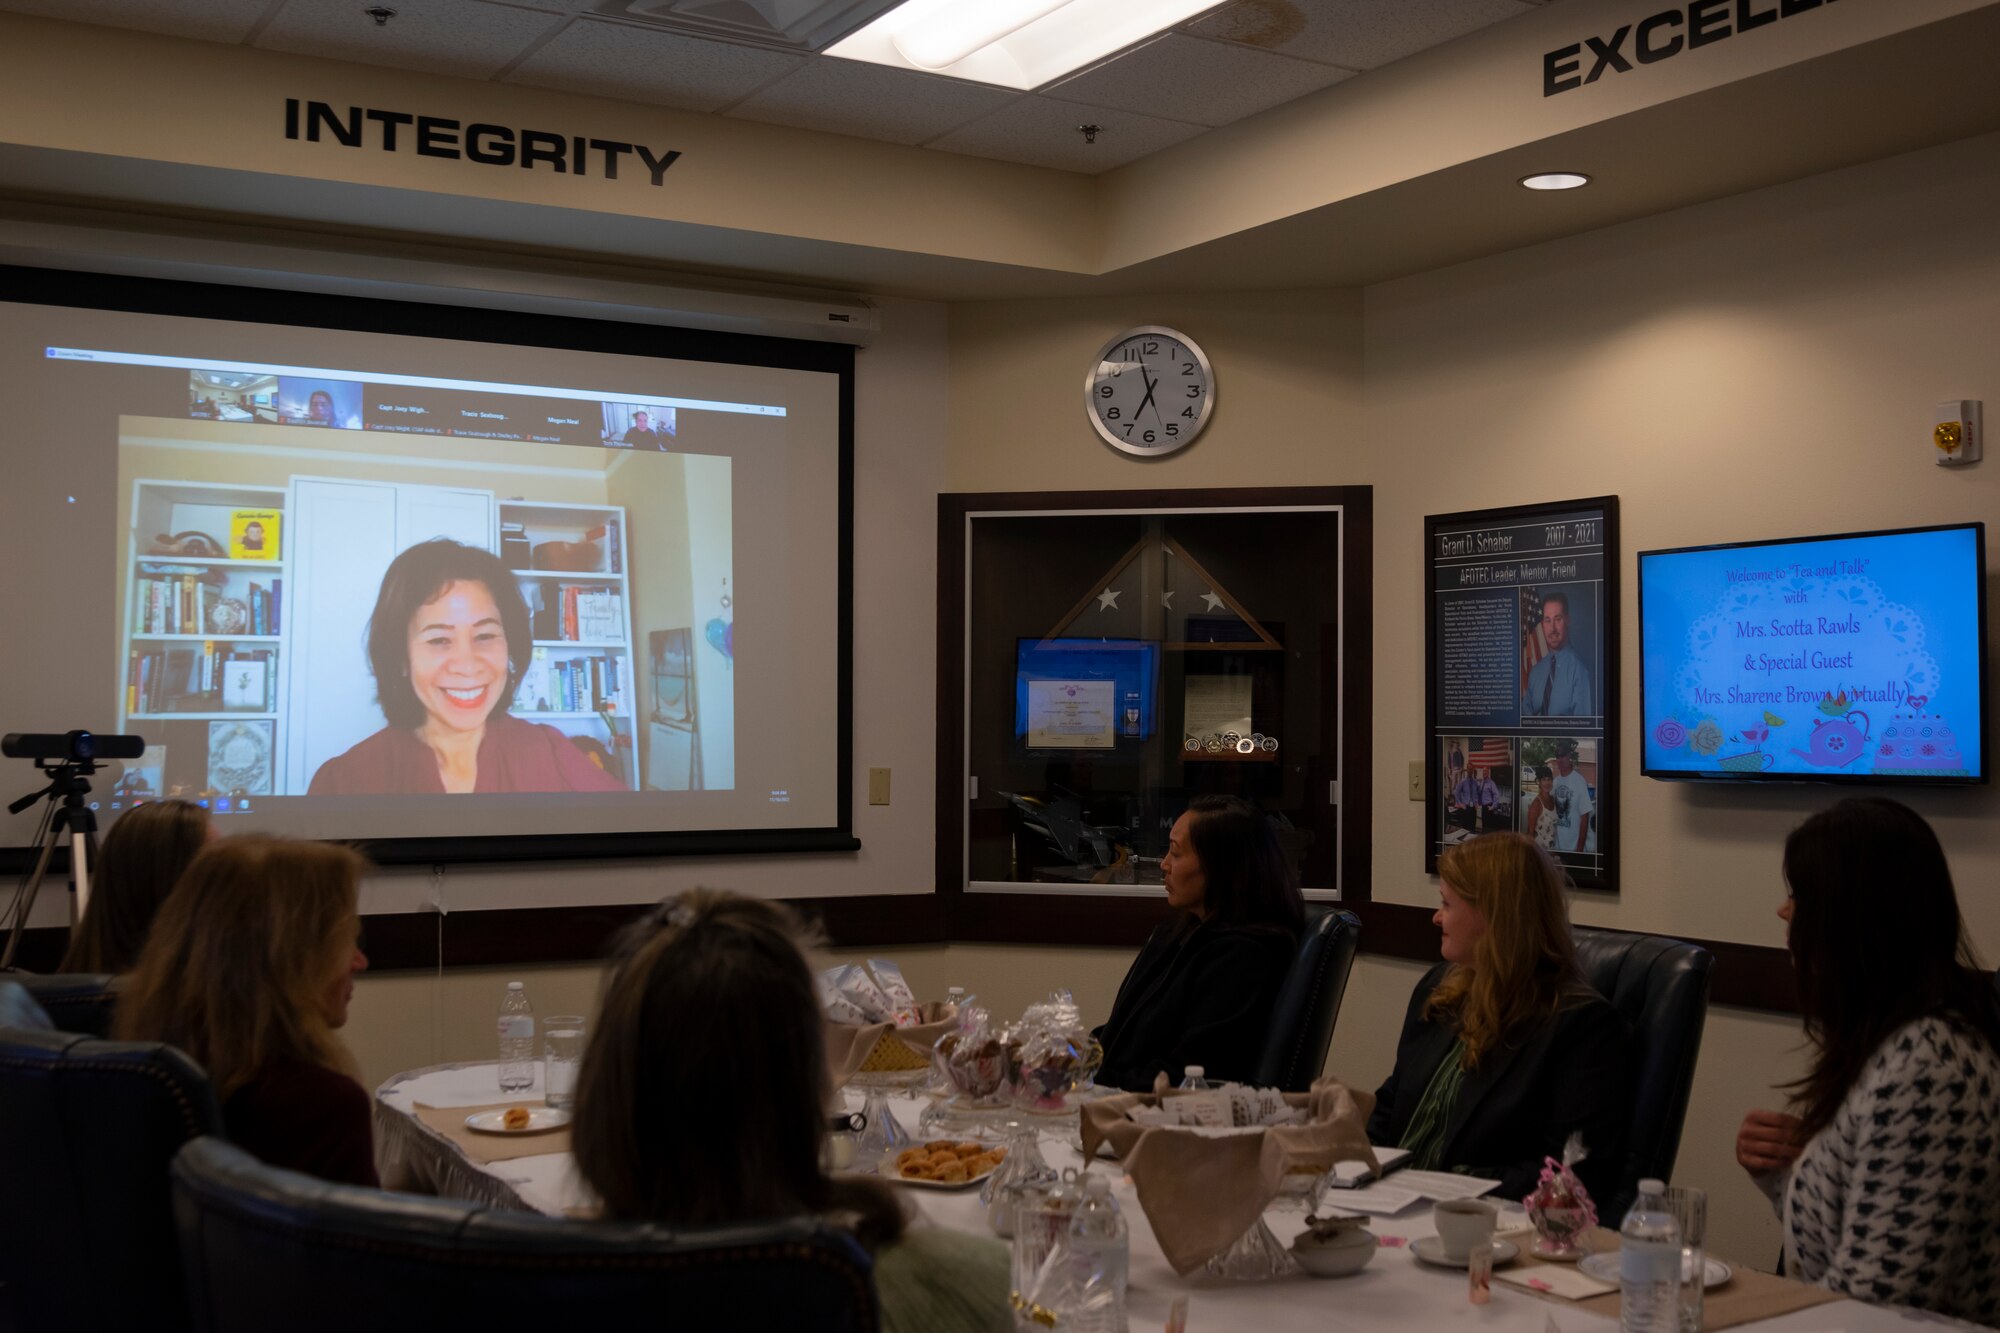 Air Force Operational Test and Evaluation Center key spouses, lead by Scotta Rawls, spouse of the AFOTEC Commander, and Jamie Griste, spouse of AFOTEC’s Command Chief Christopher Griste, held a virtual roundtable with Sharene Brown, spouse of the CSAF, on her Five and Thrive initiative, which increases focus and attention on the top five quality of life challenges military families face.